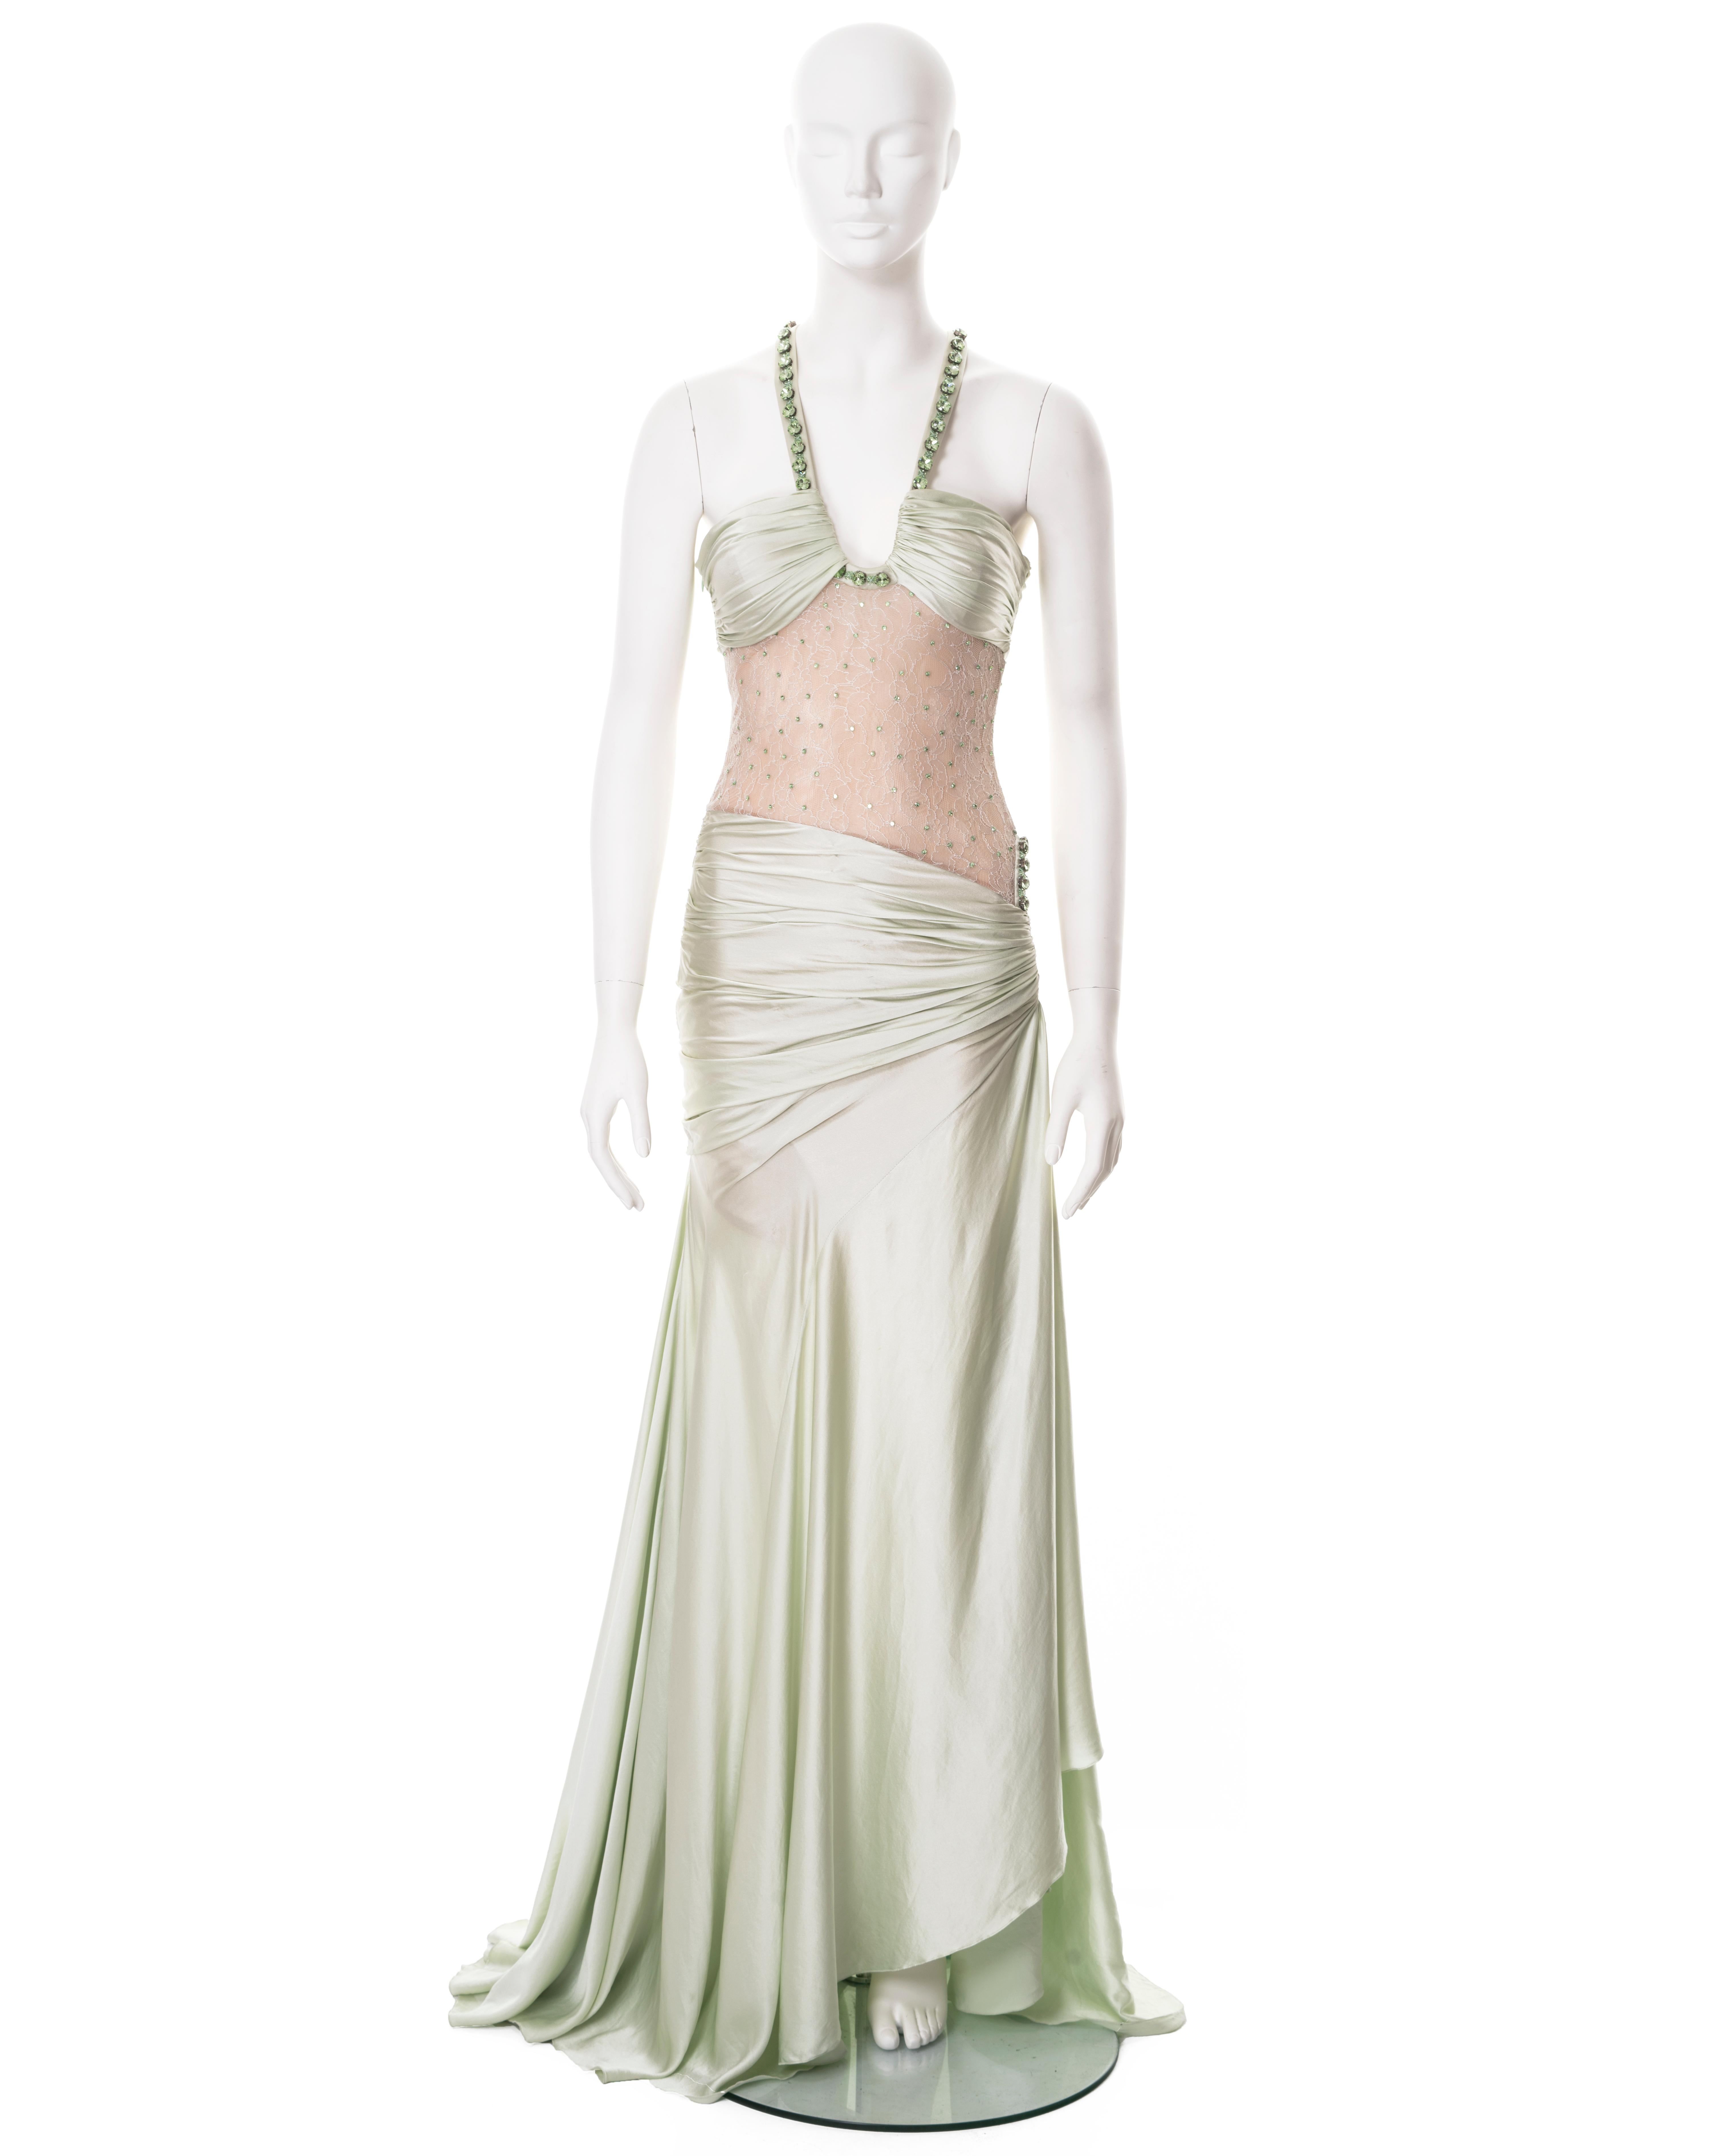 ▪ Versace demi-couture evening dress 
▪ Creative Director: Donatella Versace
▪ Sold by One of a Kind Archive
▪ Spring-Summer 2004
▪ Constructed from soft green silk 
▪ Large Swarovski cushion-cut crystals adorn the shoulder and hip straps
▪ Ruching